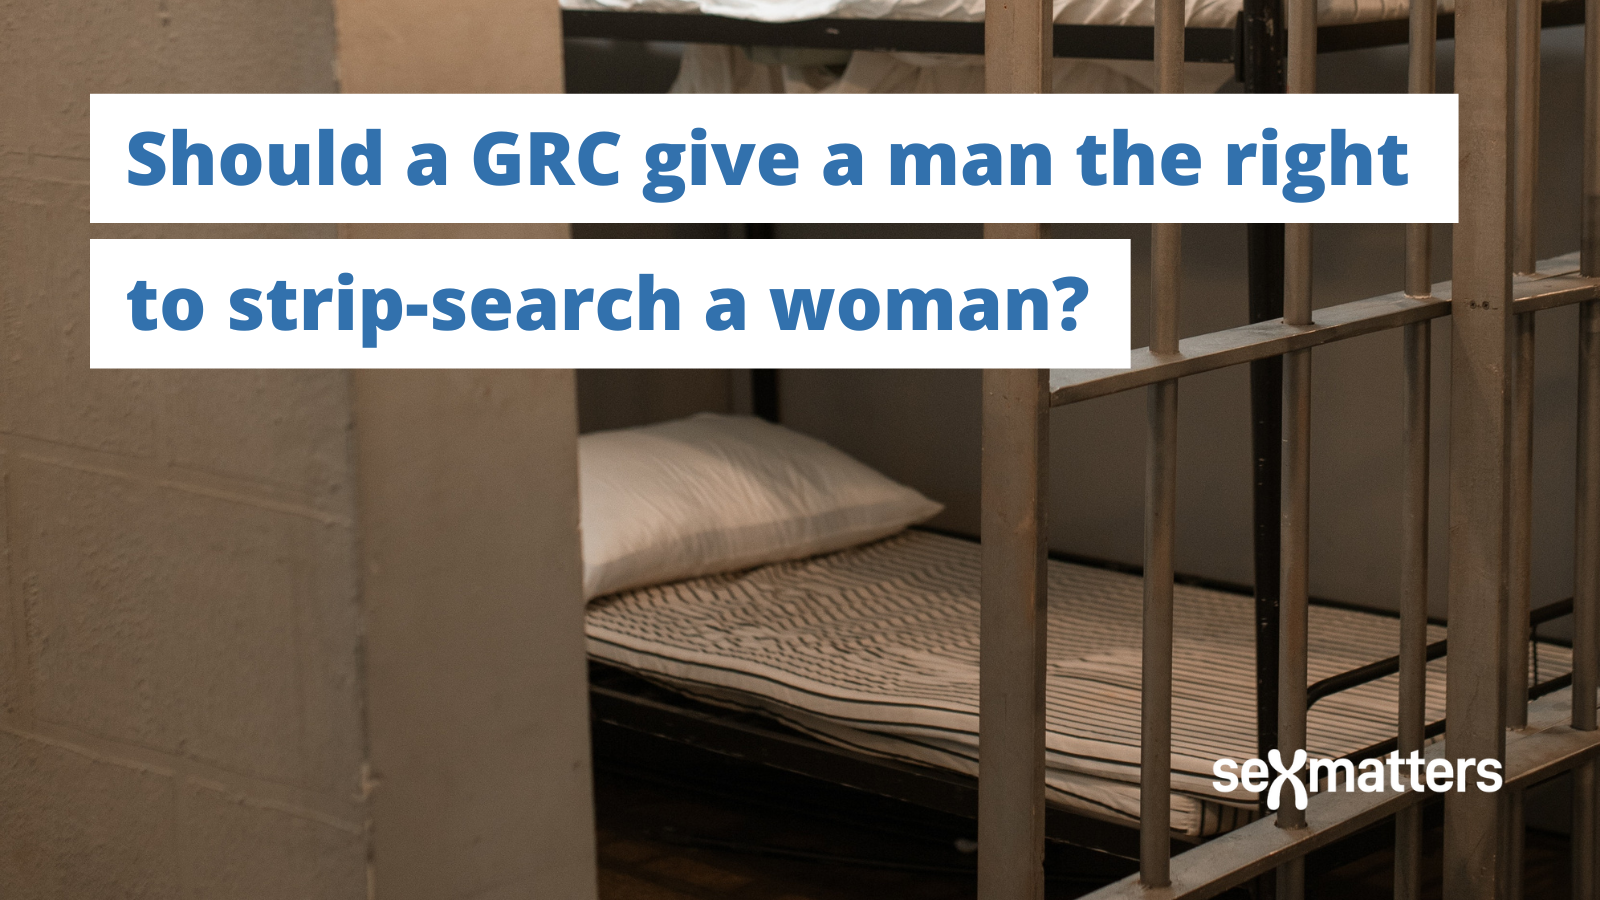 Should a GRC give a man the right to strip-search a woman?